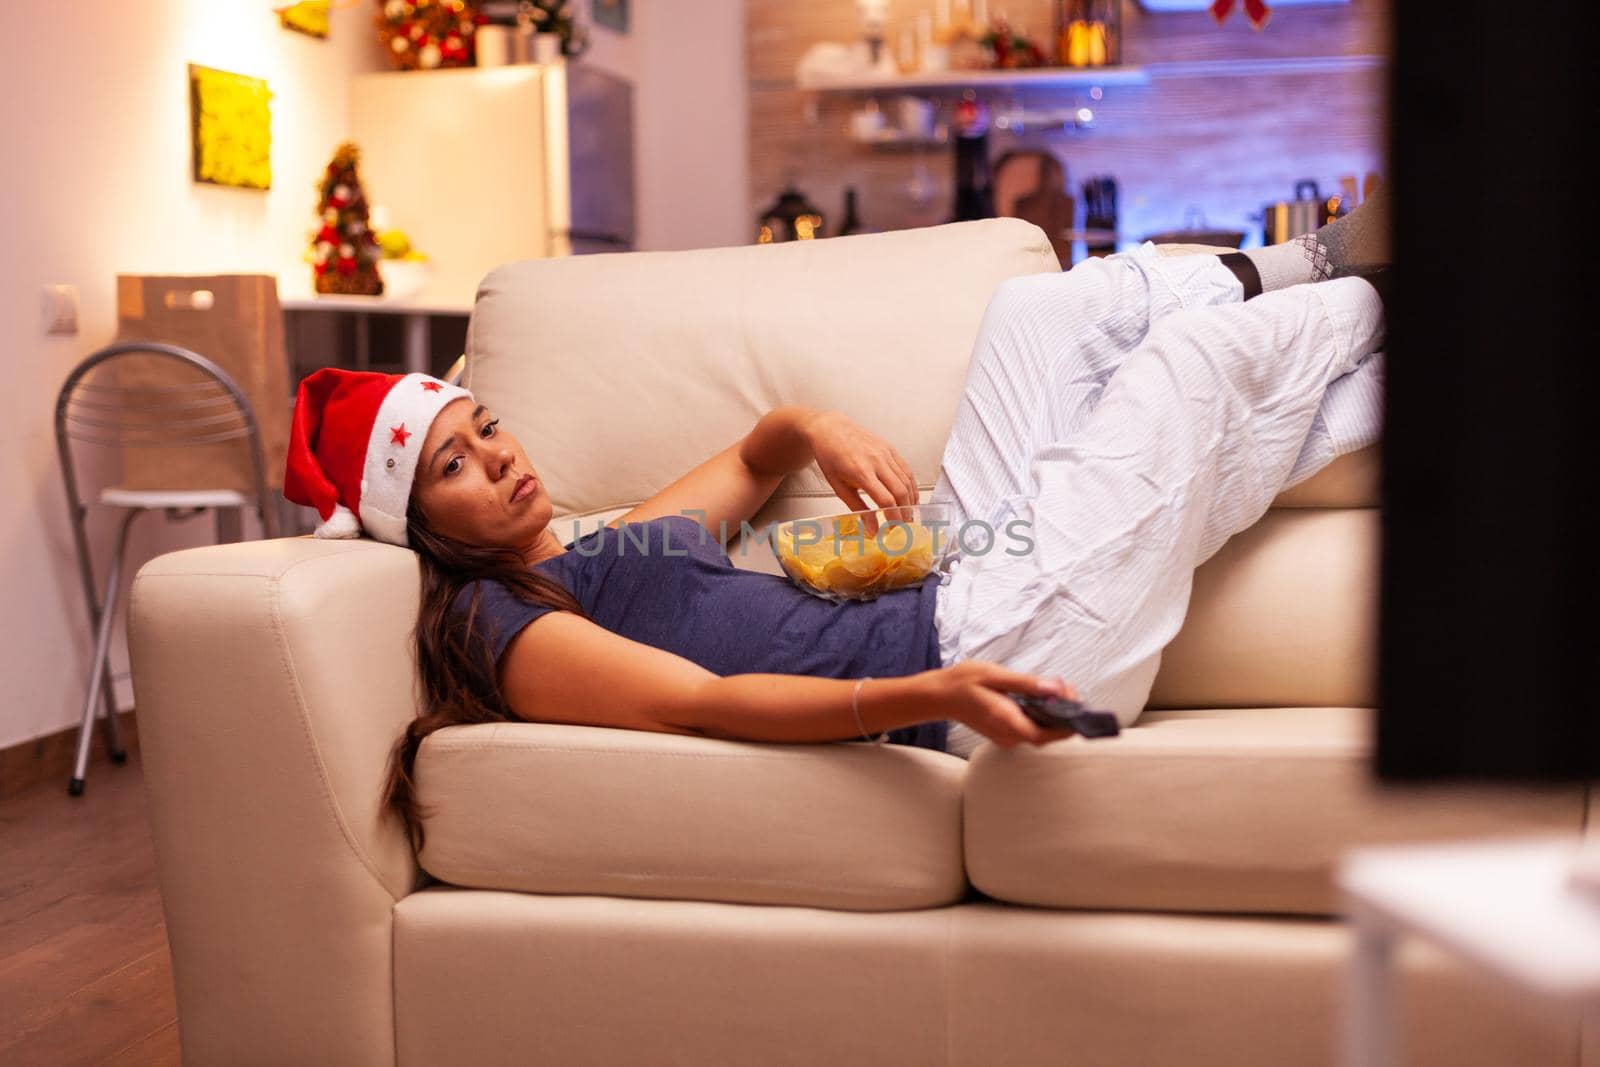 Woman resting on couch eating snacks while searching winter movie on television by DCStudio